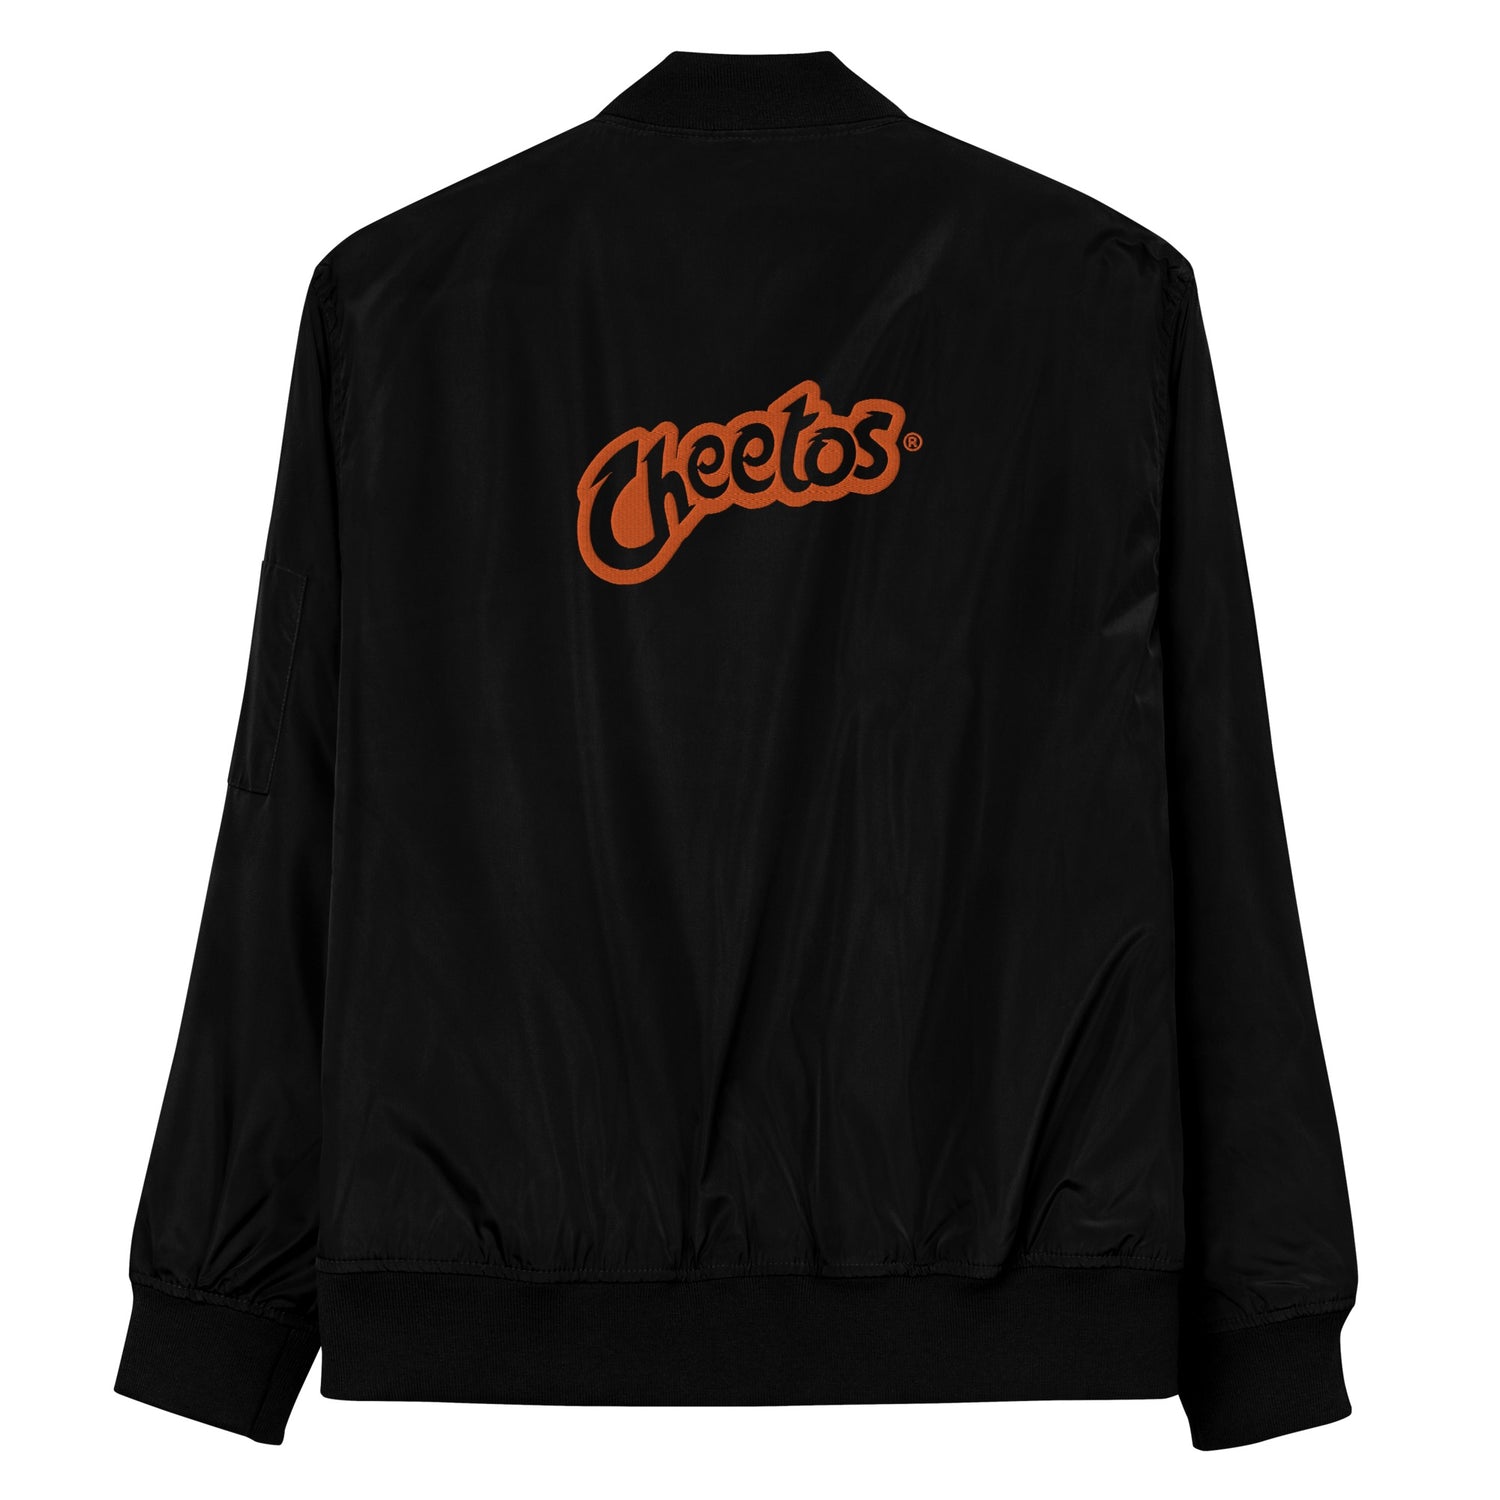 Cheetos Chester Cheetah Silhoutte Recycled Bomber Jacket